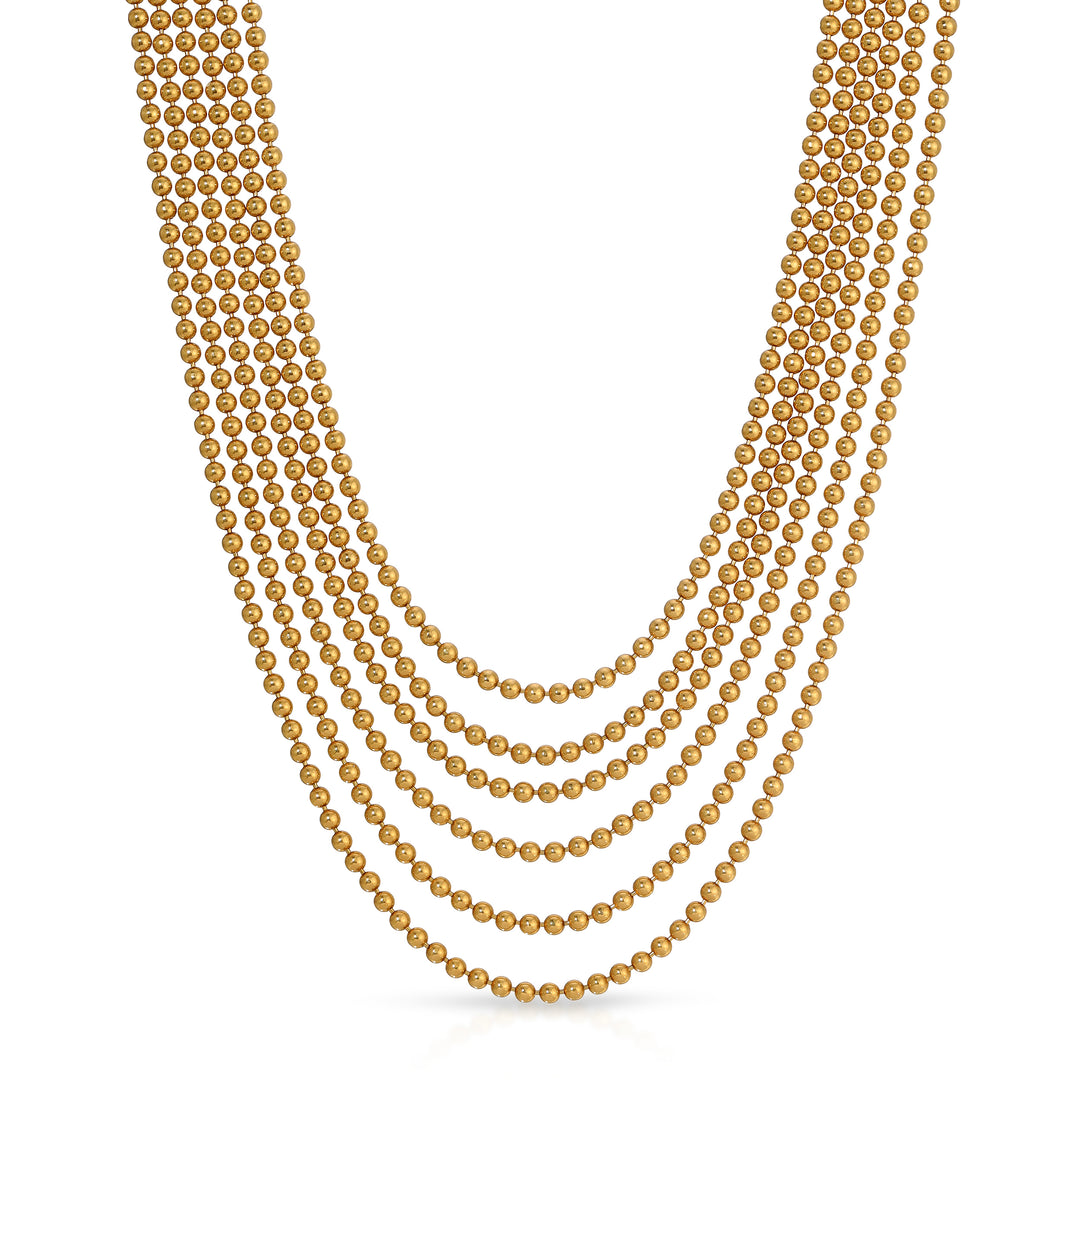 Cartier 'Draperie' Six Strand Necklace in 18K Gold